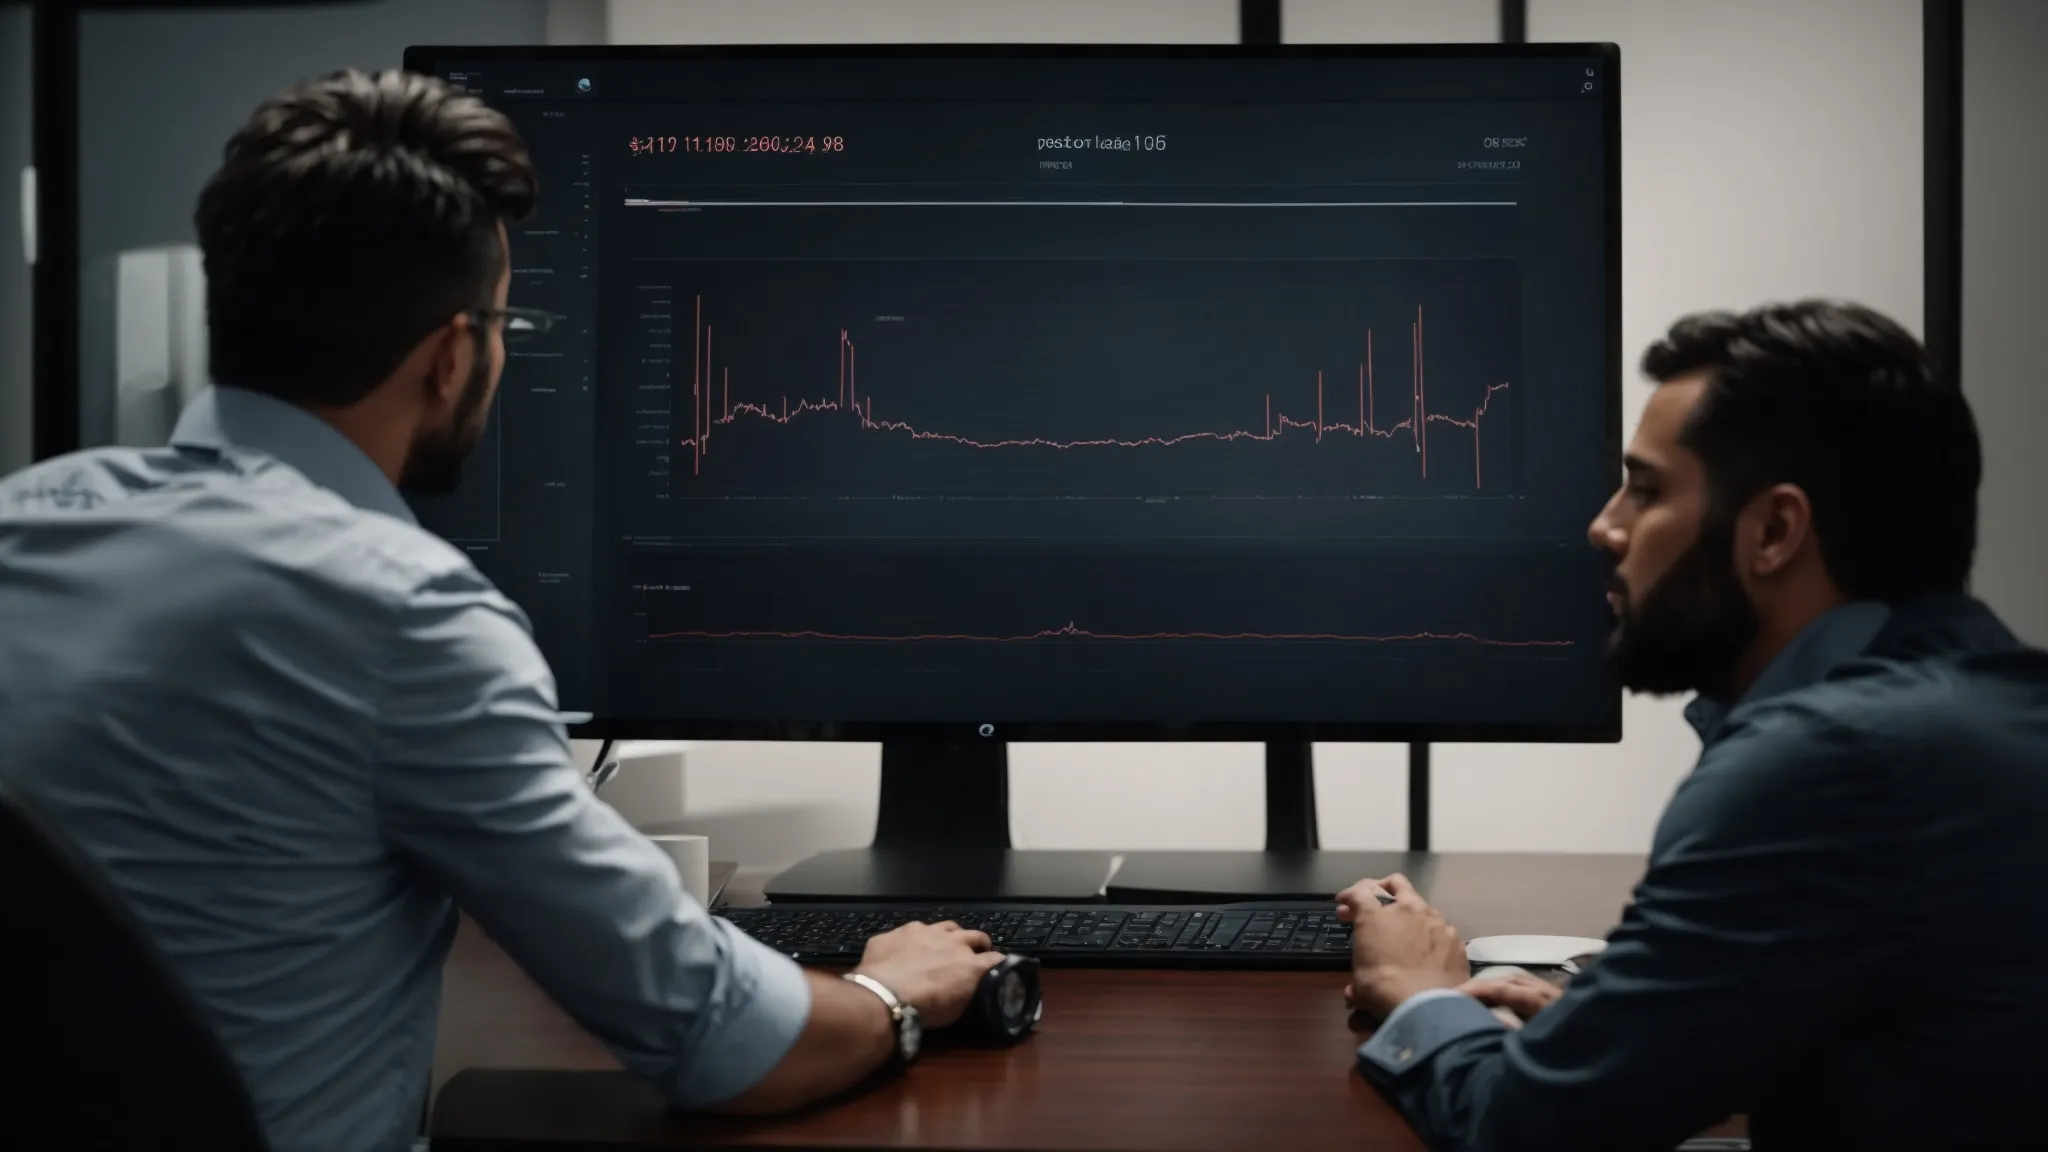 a professional meeting with two individuals analyzing an seo performance graph on a computer screen.